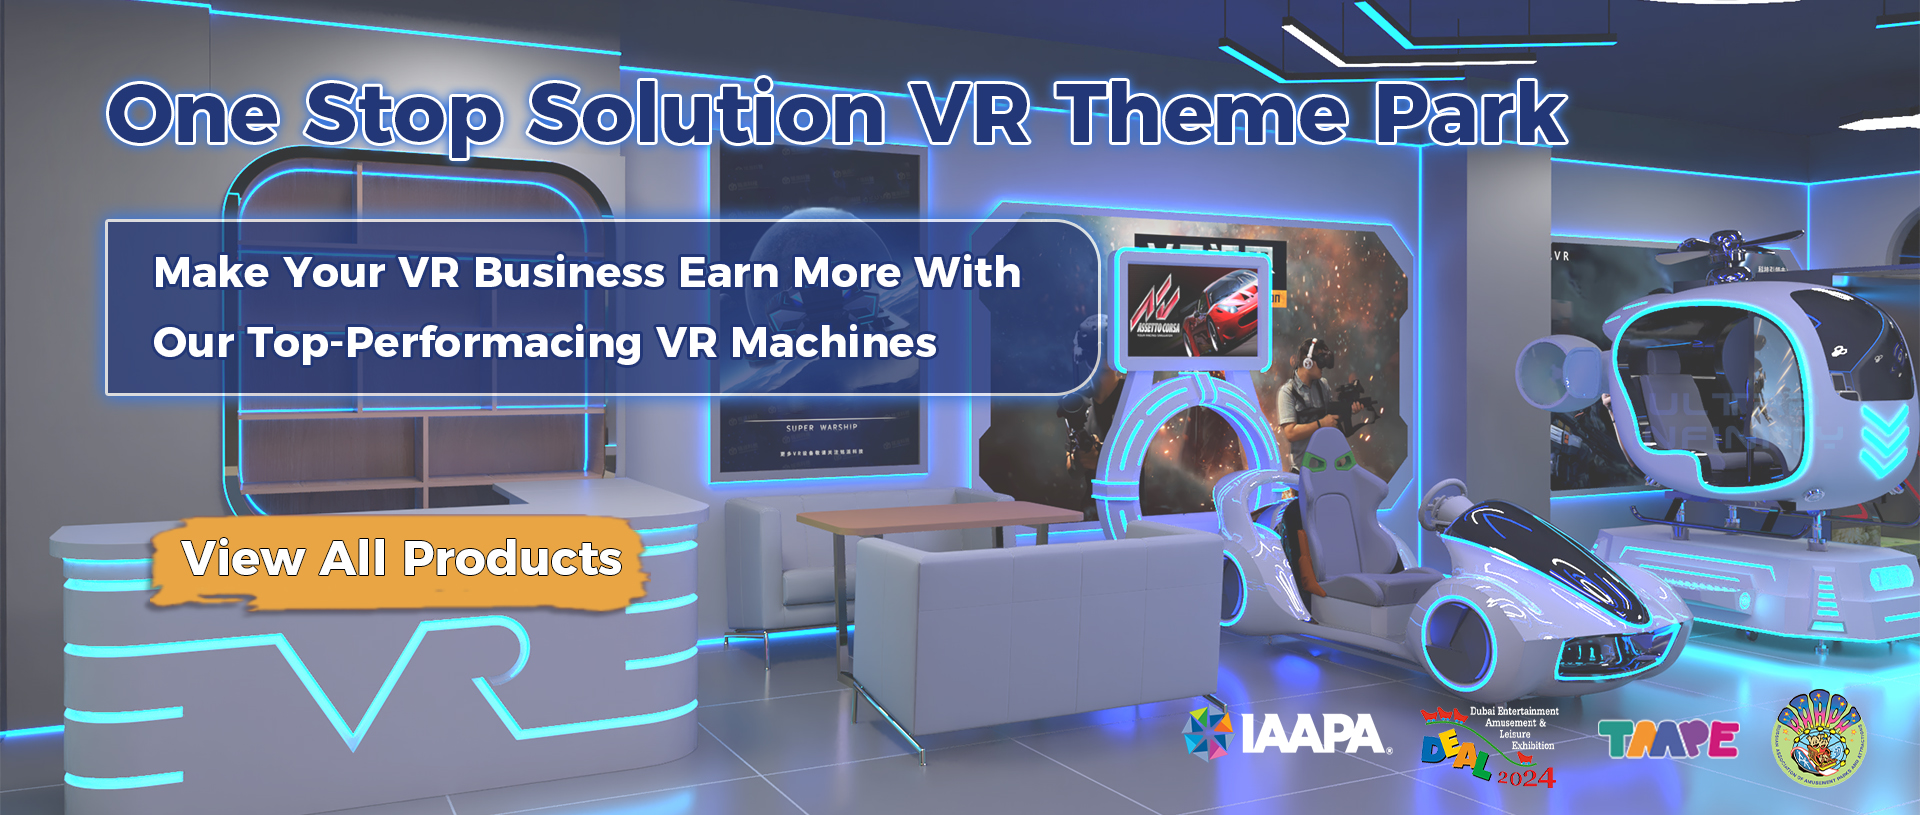 Contact us for your one stop solution vr theme park service.